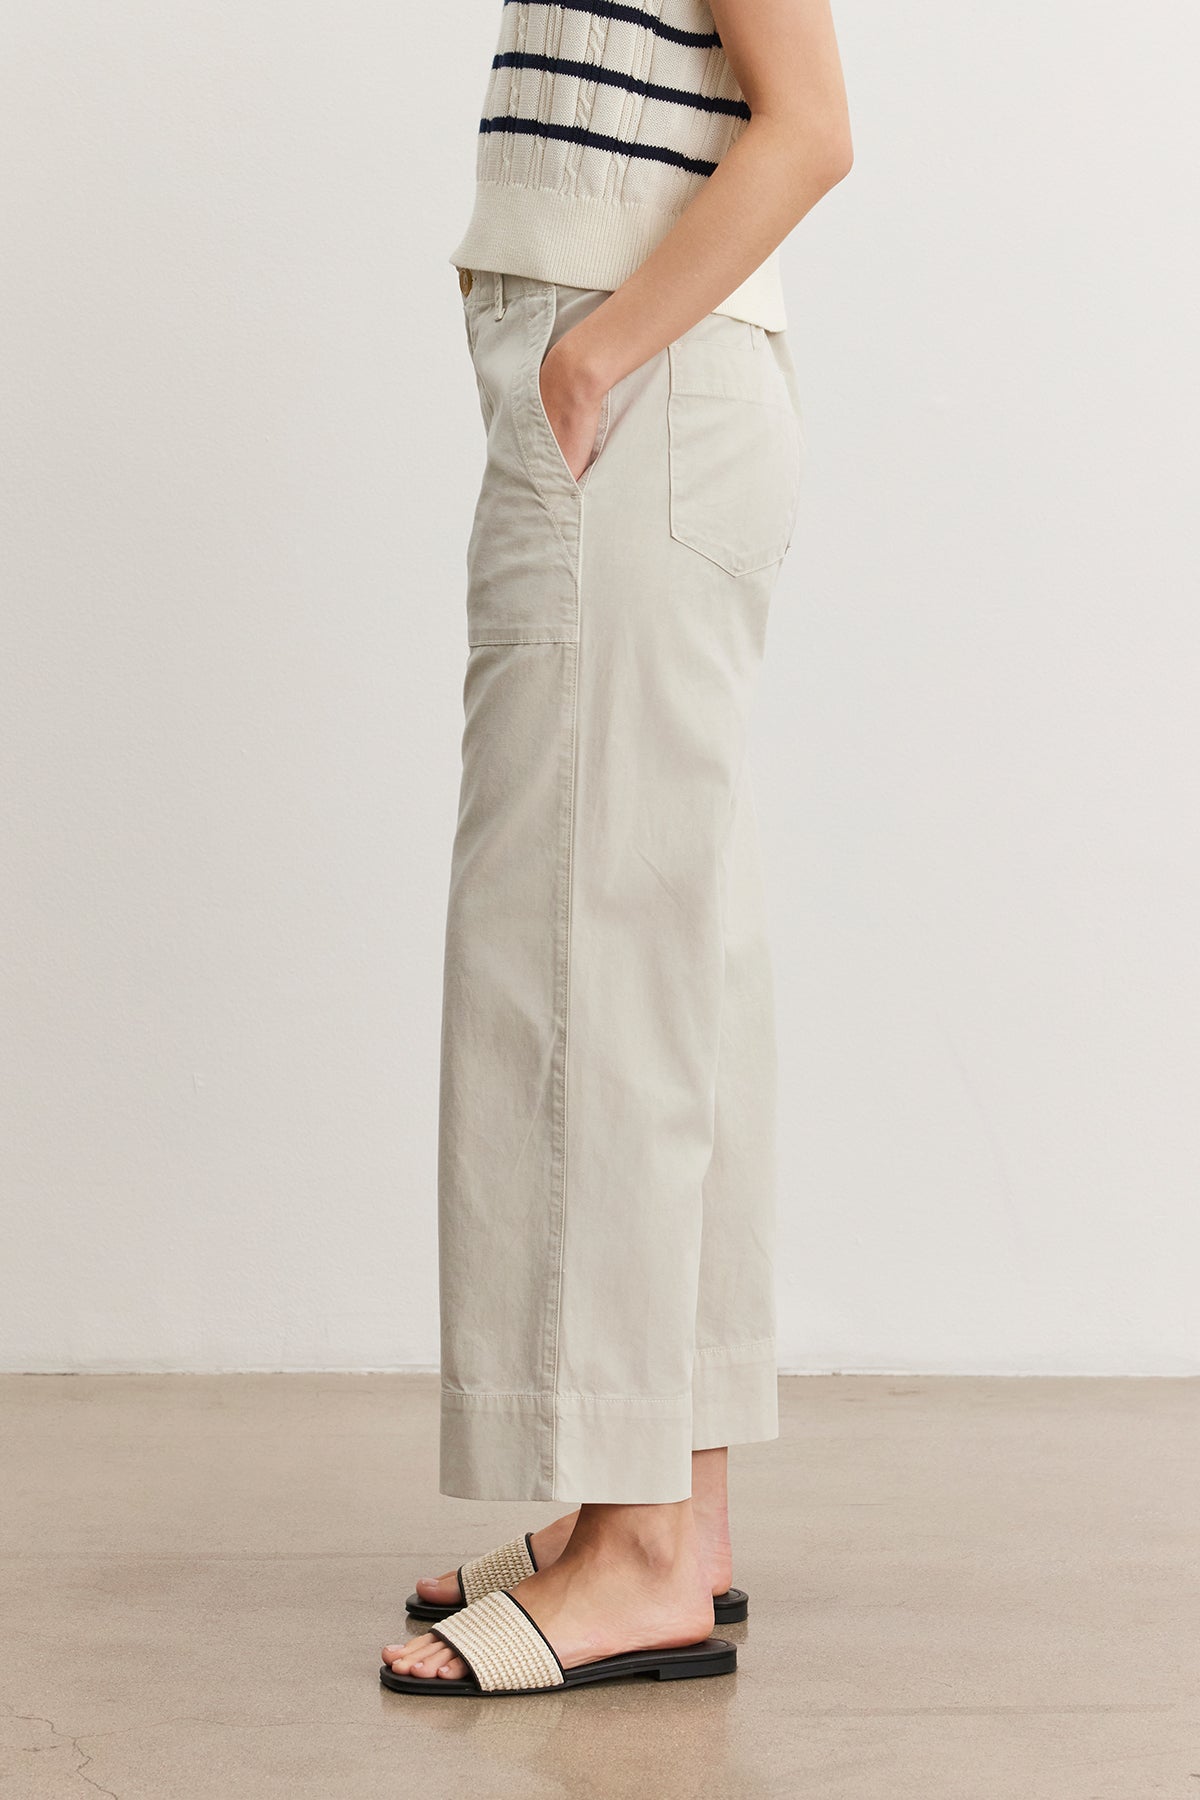 A woman standing in a neutral pose wearing a striped tank top, light gray Velvet by Graham & Spencer MYA COTTON CANVAS PANTS, and black slide sandals. Only the lower half of her body is visible.-36998760759489